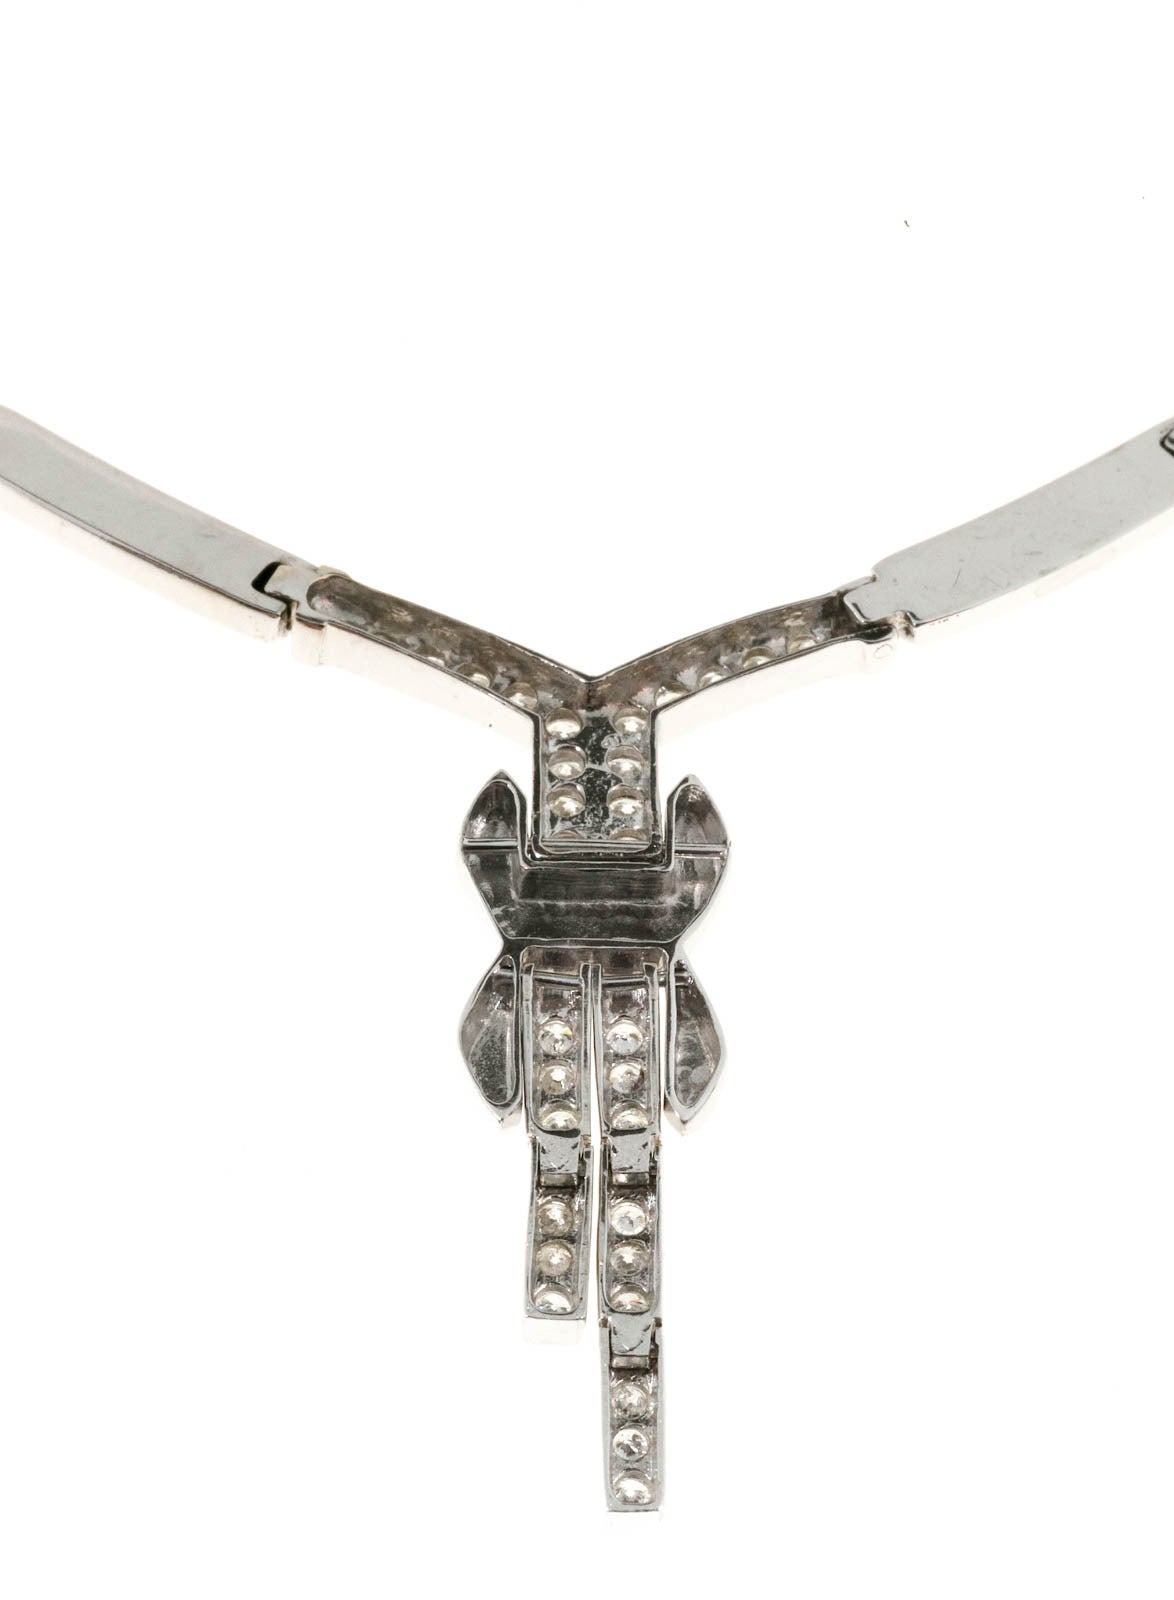 Fabulous 1950's Hinged link 14k white gold necklace with a hinged diamond center. Hidden catch and side lock safety.

31 full cut diamonds, approx. total weight .62cts, G, SI1
14k White Gold
Stamped: 14k
16.5 grams
Length: 18 inches
Center